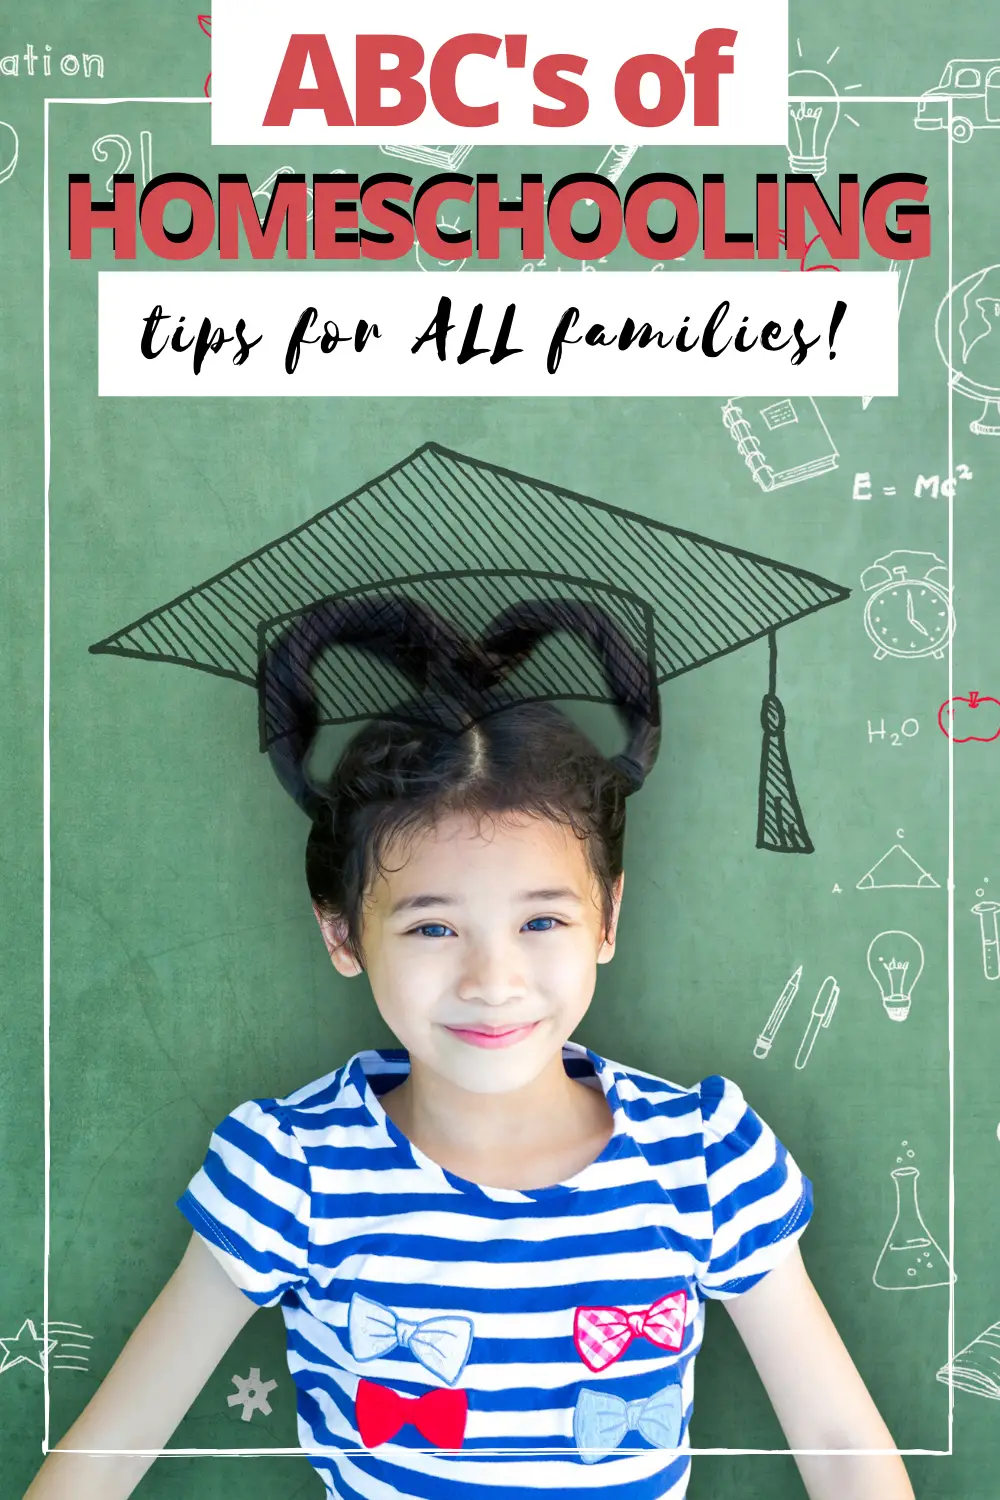 Discover 26 homeschooling tips for both new homeschoolers and seasoned ones. Find encouragement, tips, and ideas from A to Z!